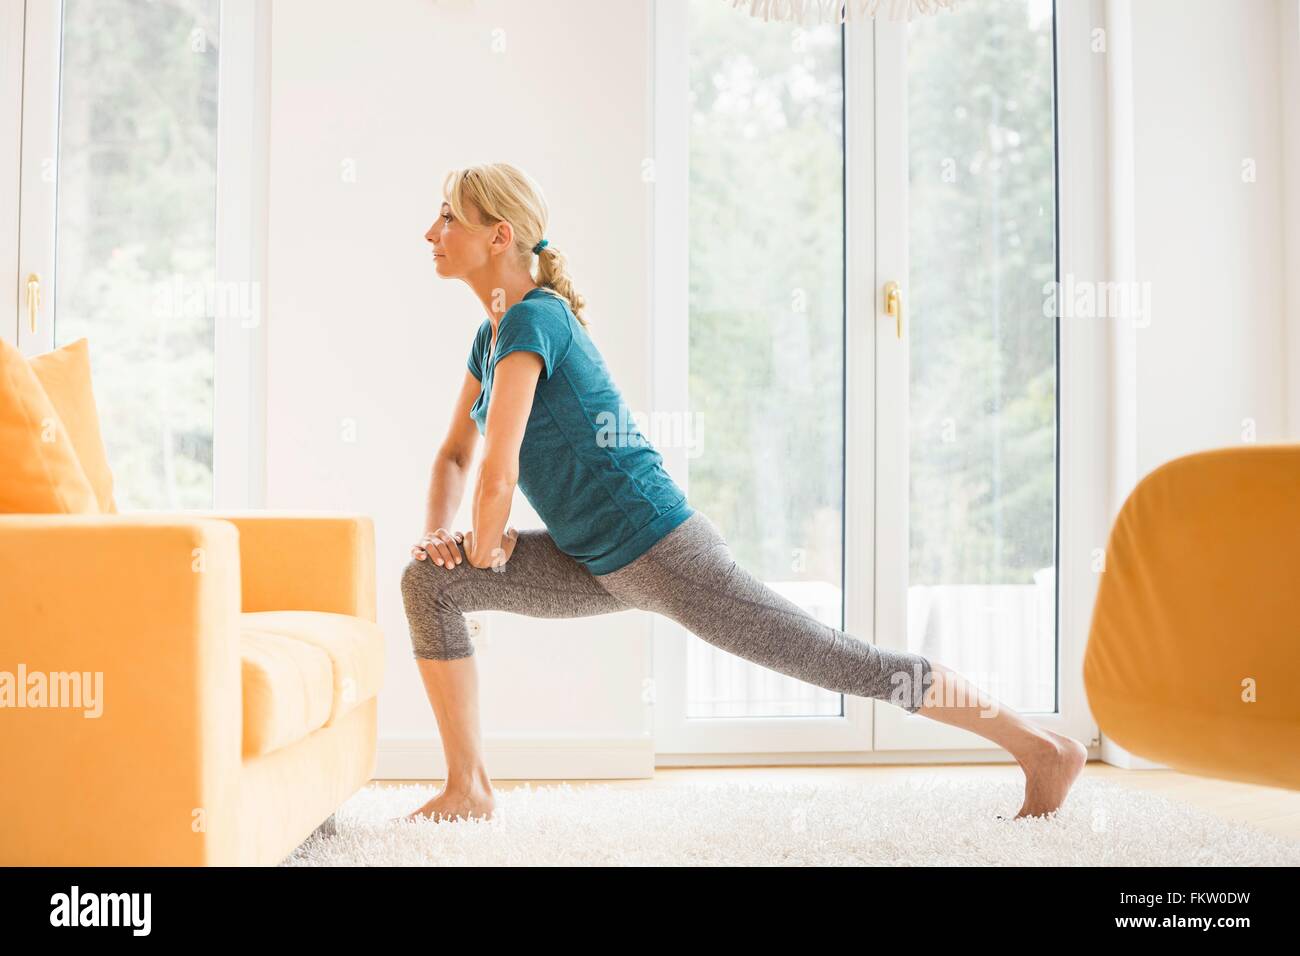 Mature woman doing lunge stretch exercise in living room Stock Photo